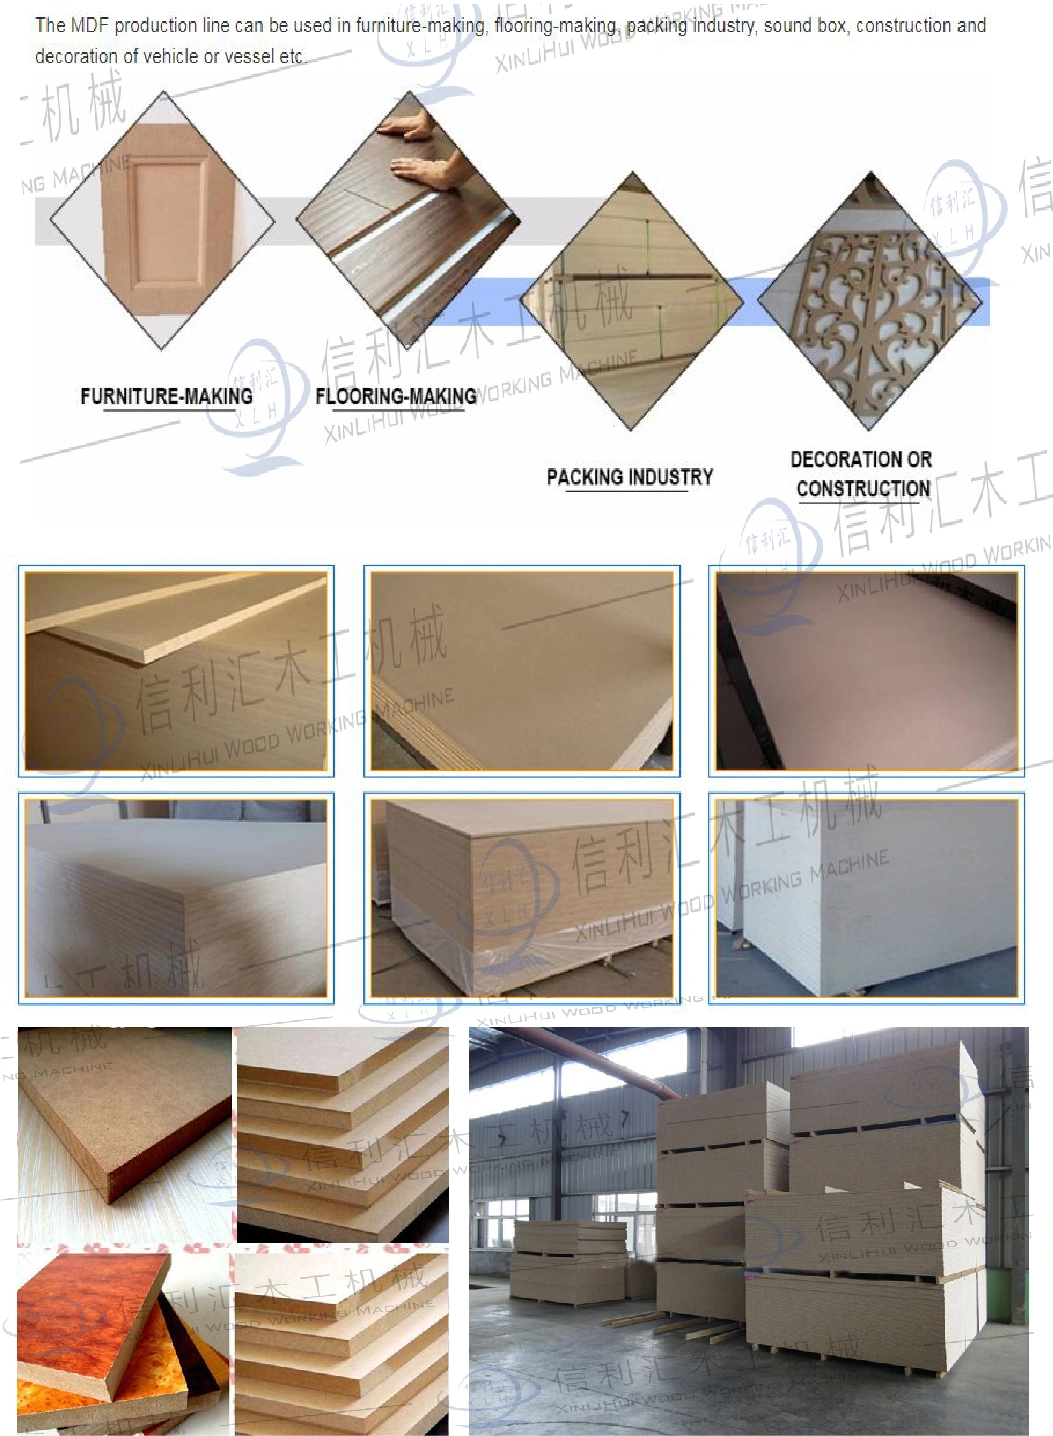 MDF Wood Flooring Production Line for Construction Company Usage From Used Woods/High Glows MDF Board Machines Wooden Floor Tile Making Machine